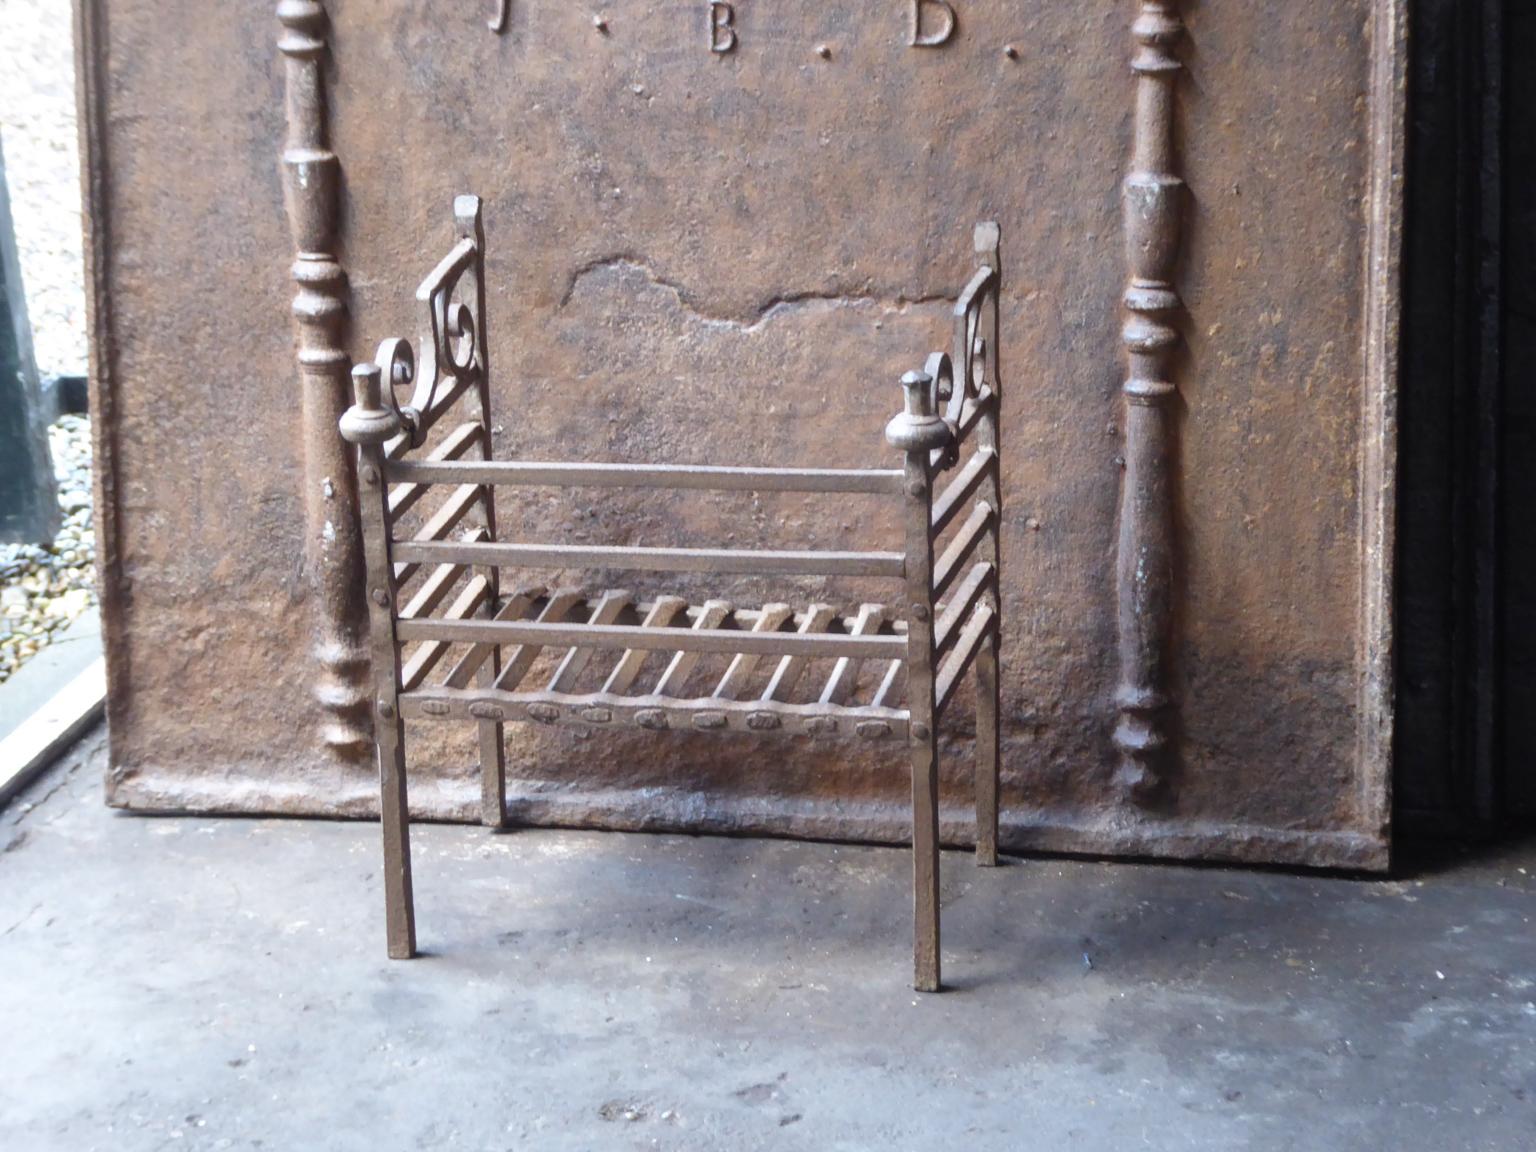 18th-19th century Dutch neoclassical fireplace grate made of wrought iron. The fireplace grate is in a good condition and is fully functional.